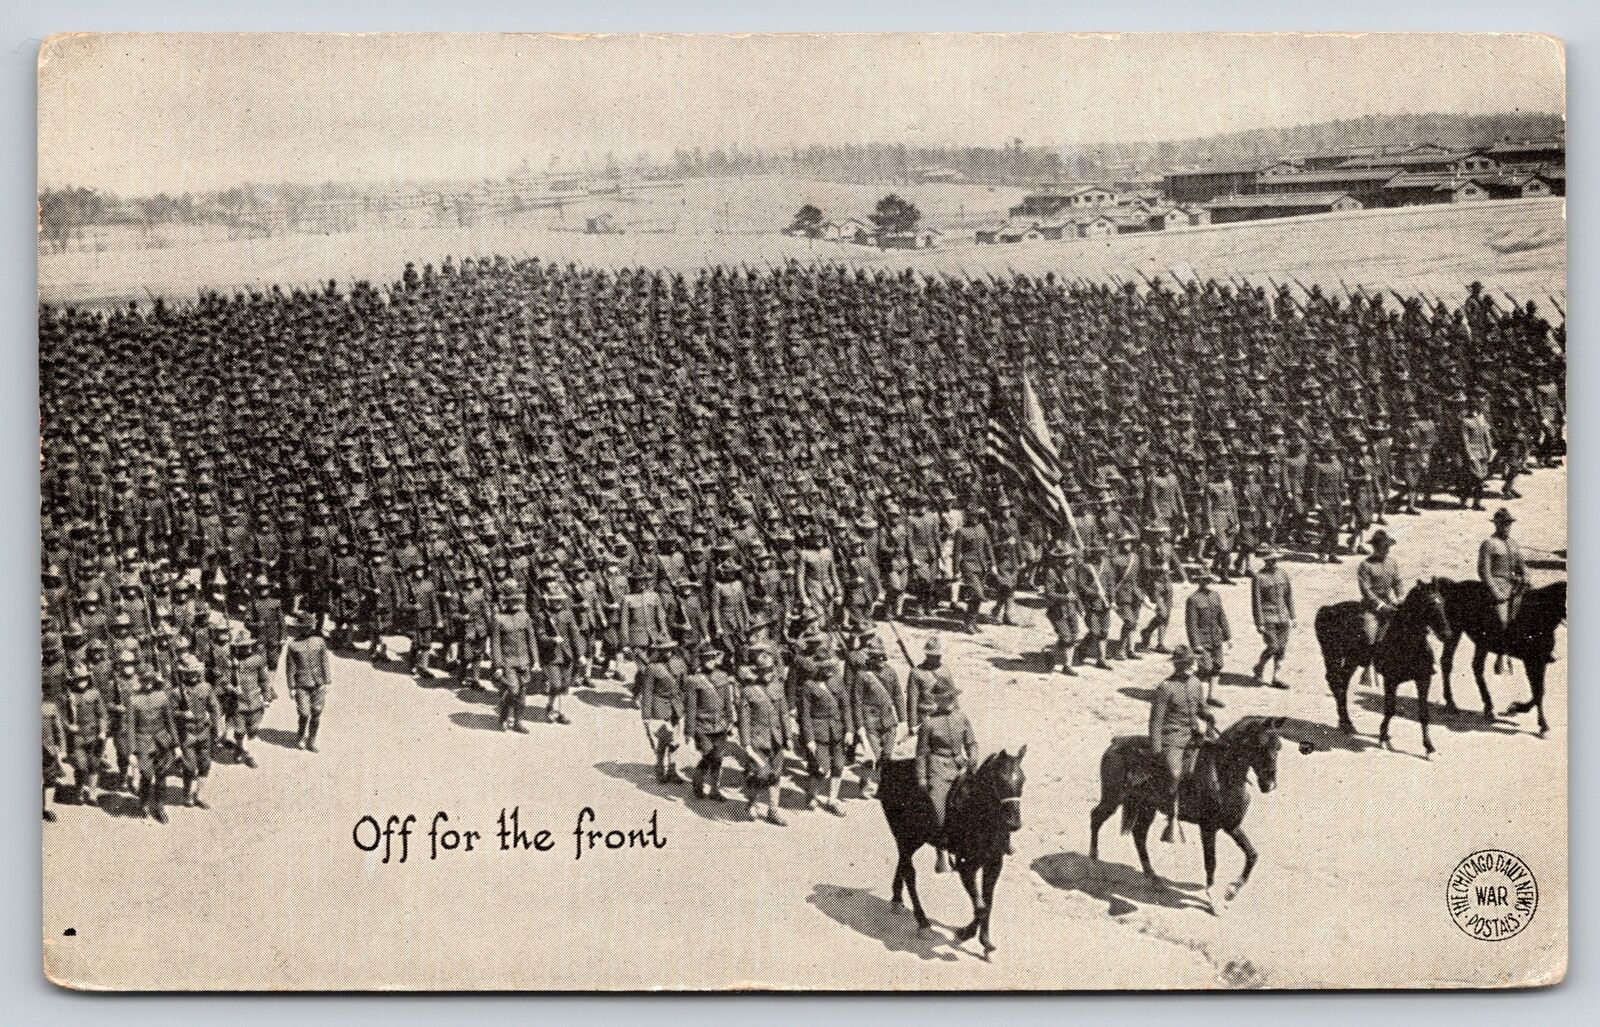 Military~Air View Soldiers Marching Off For The Ford~Vintage Postcard